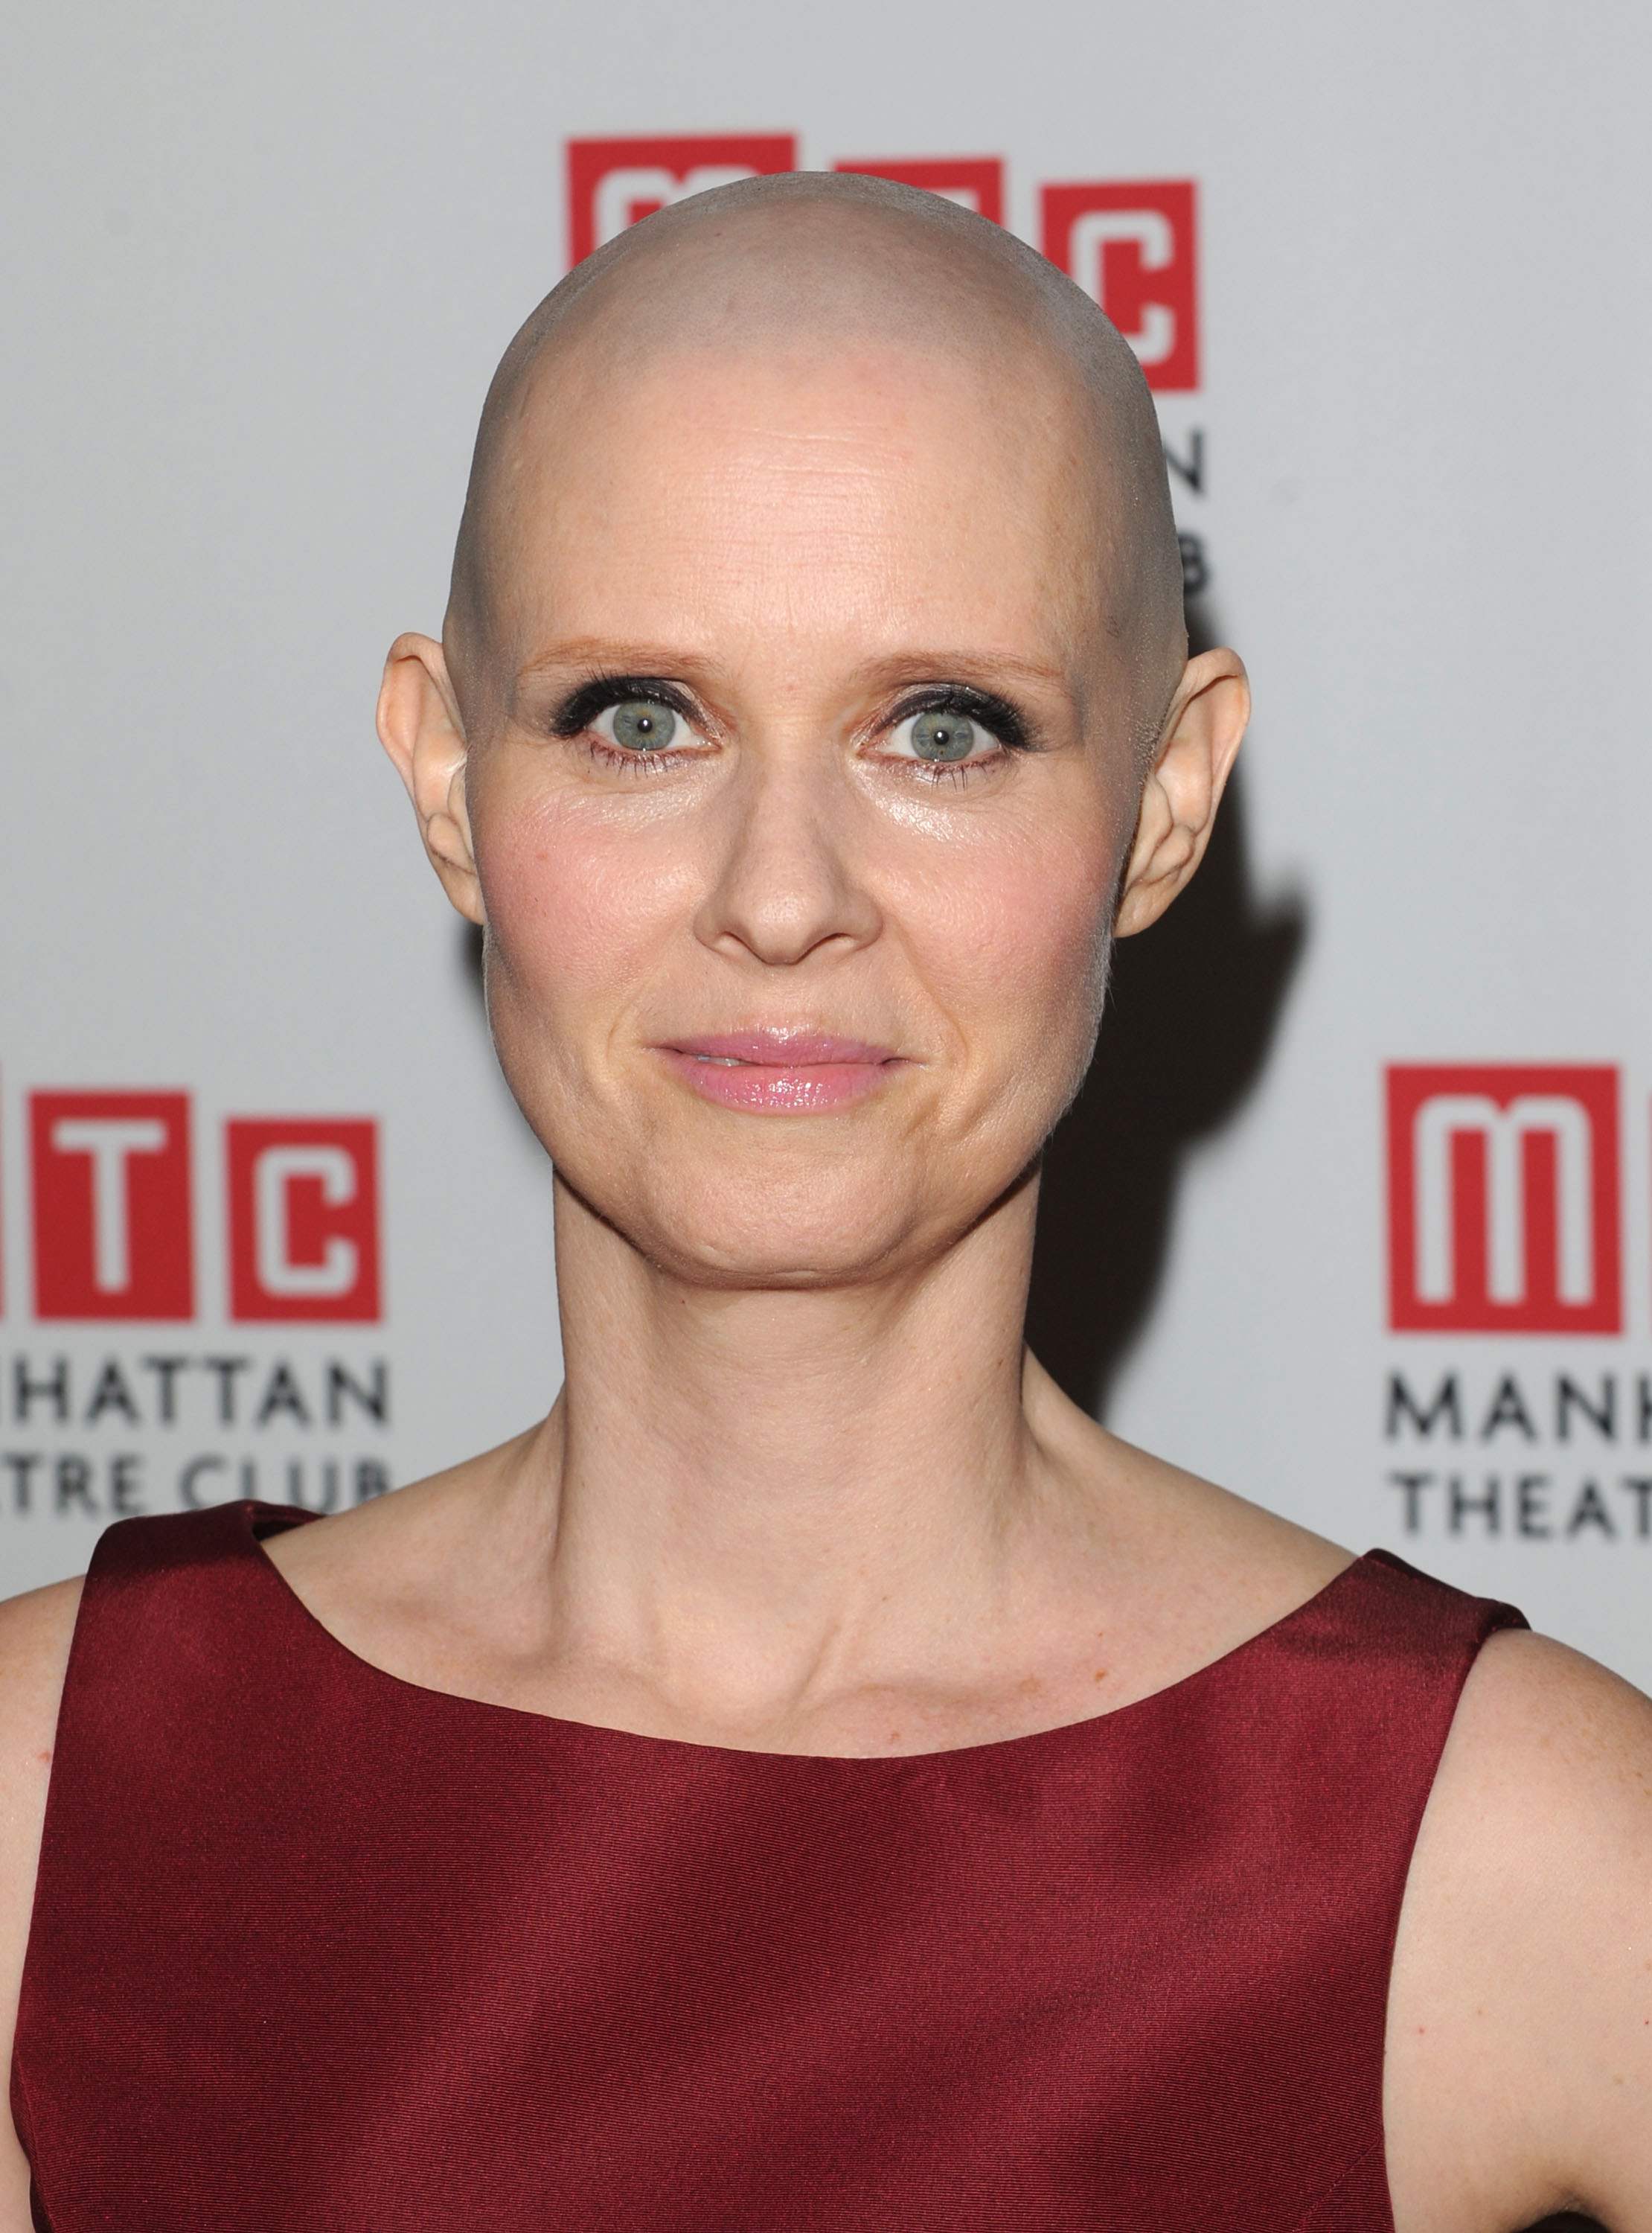 Cynthia Nixon on January 26, 2012, in New York City. | Source: Getty Images